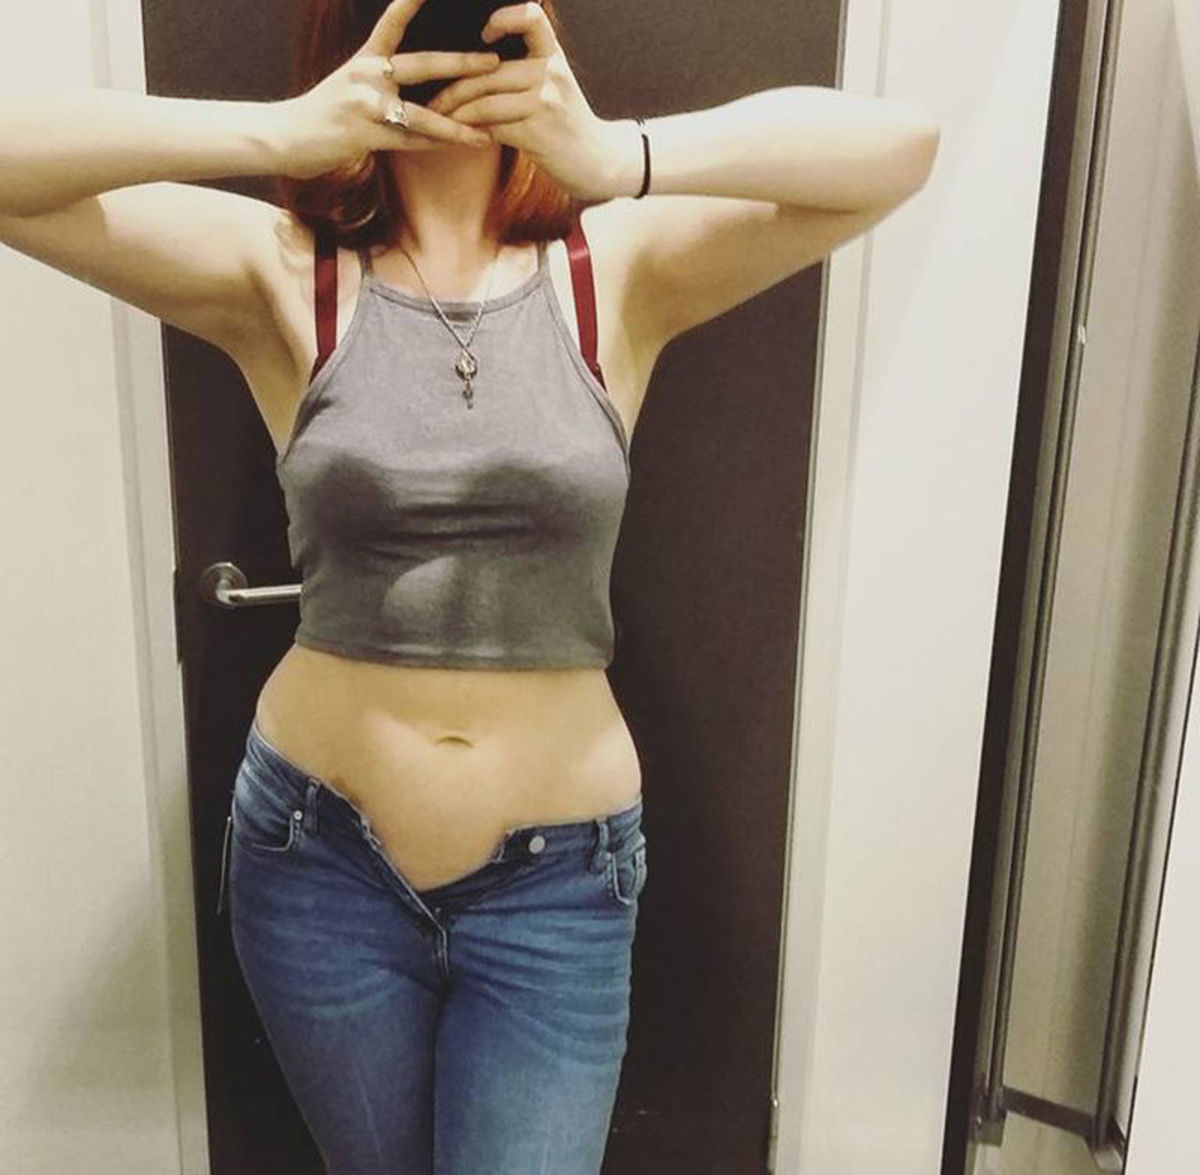 Ruth posted this photo of herself trying to put on size 16 jeans.